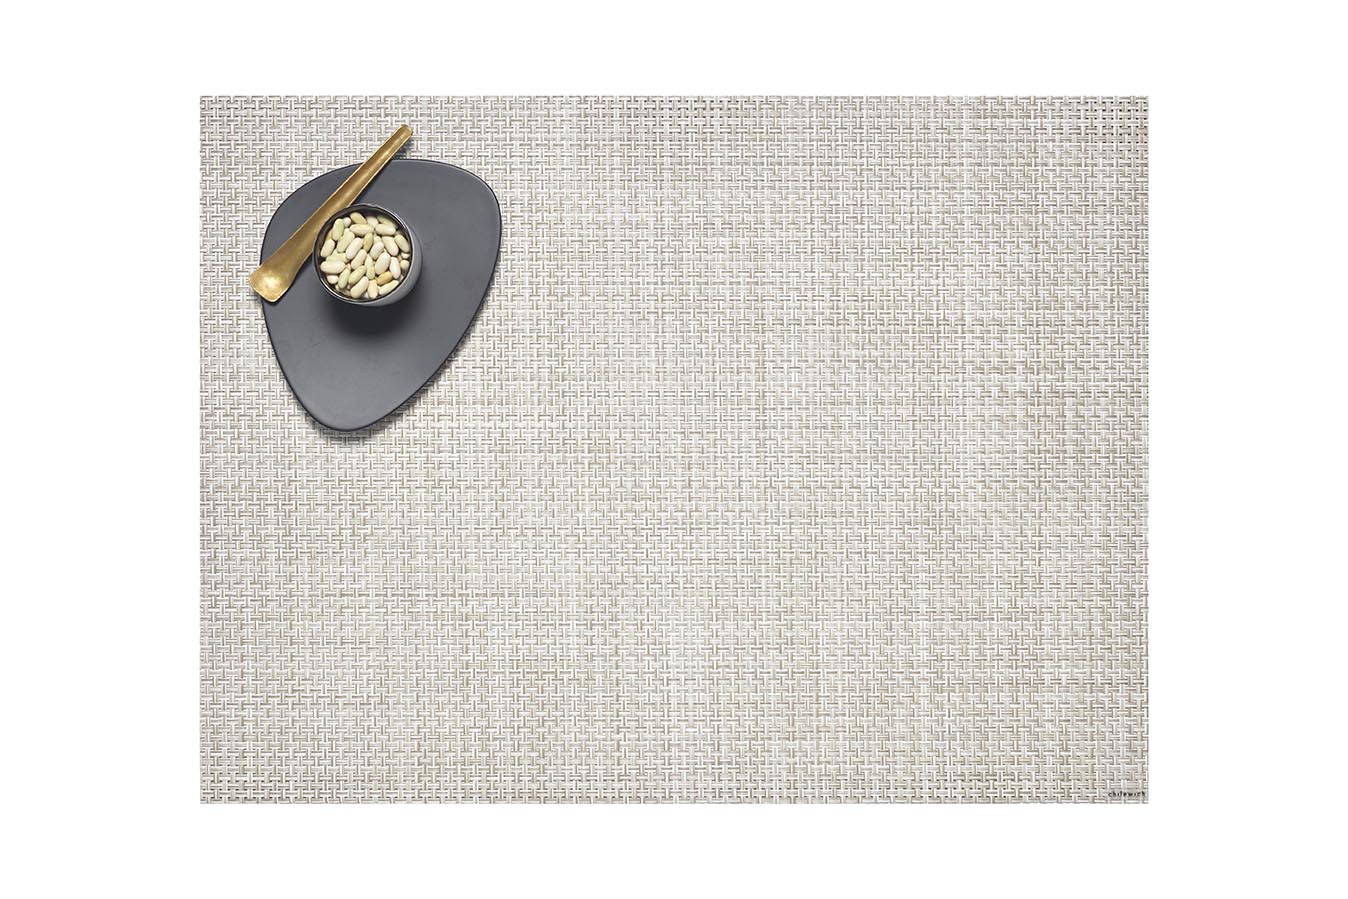 Chilewich Placemat - Basketweave - Natural